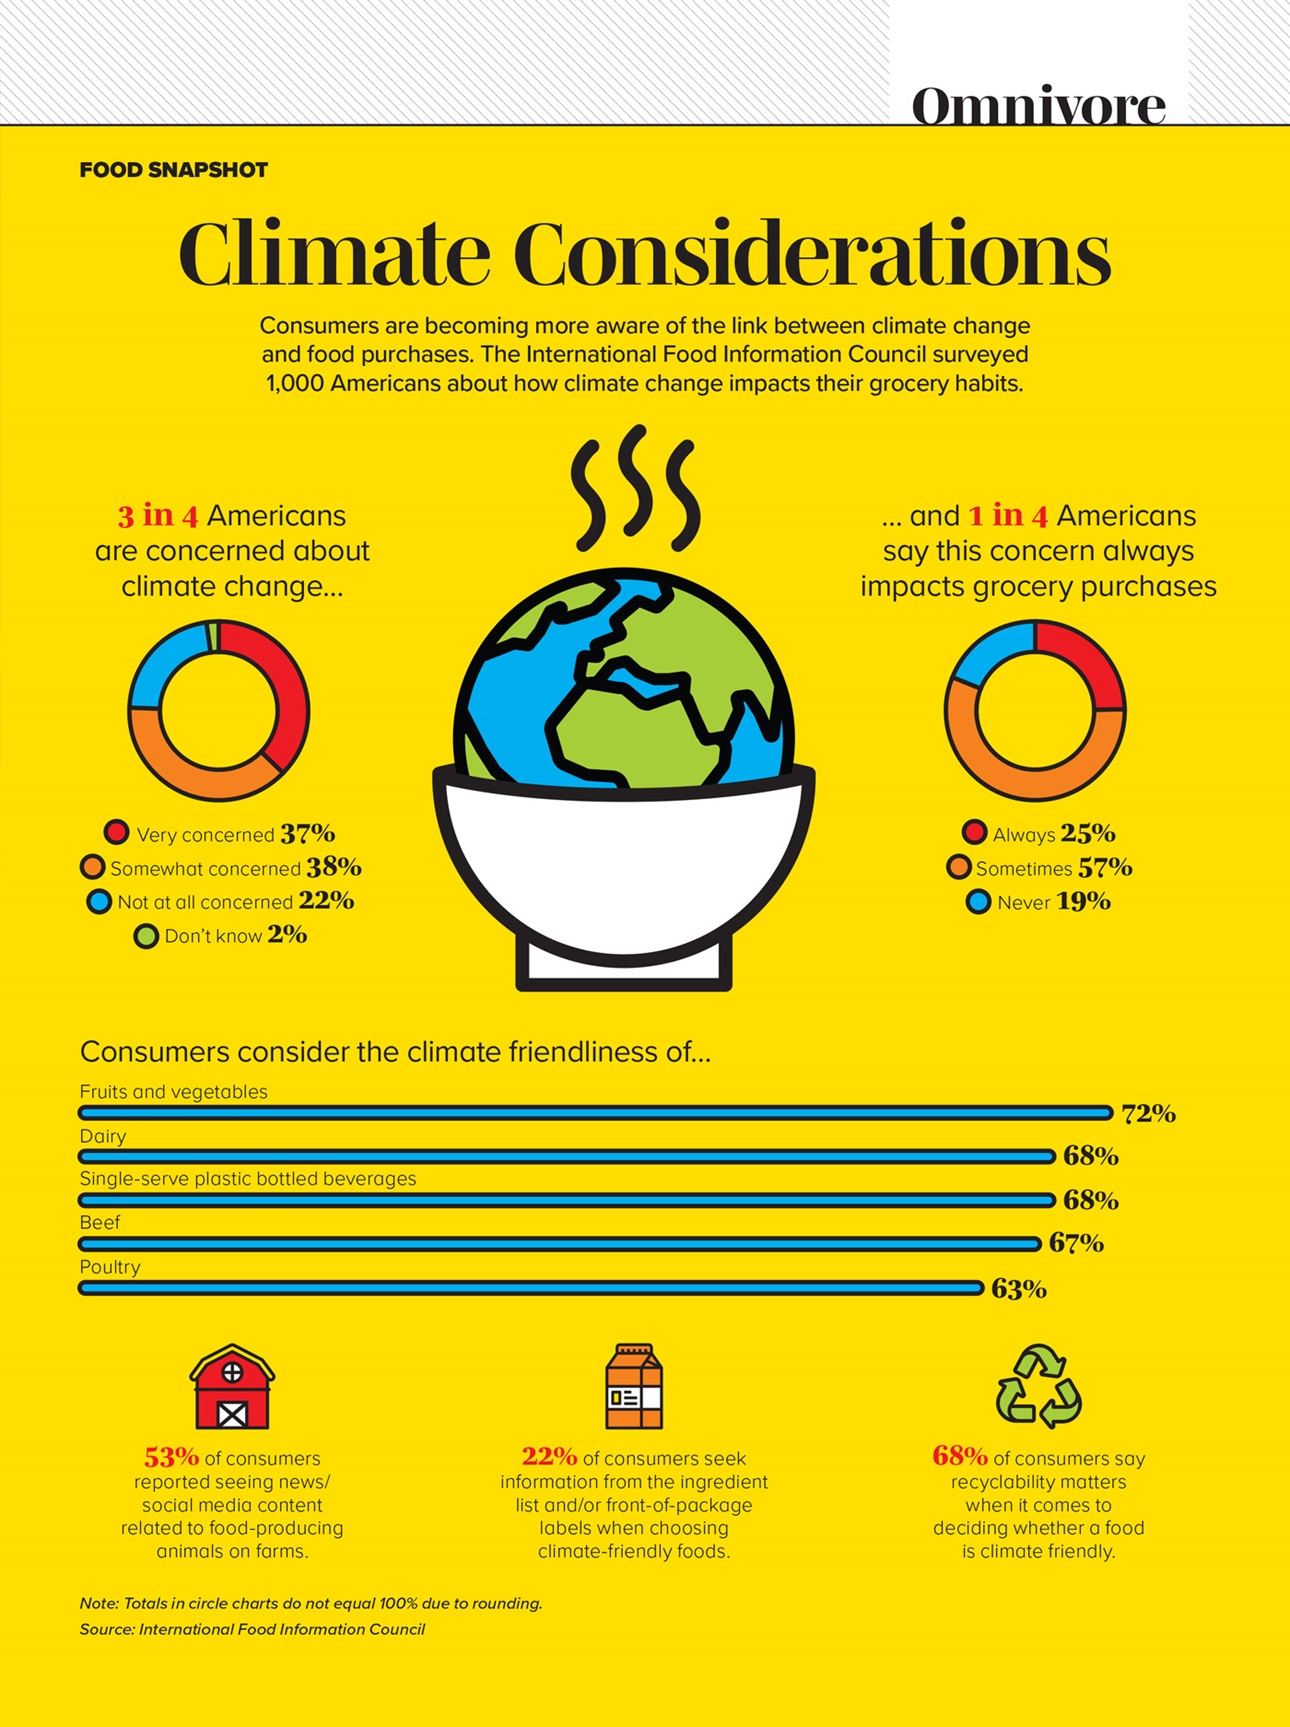 Infographic on how climate considerations impact consumer grocery habits.